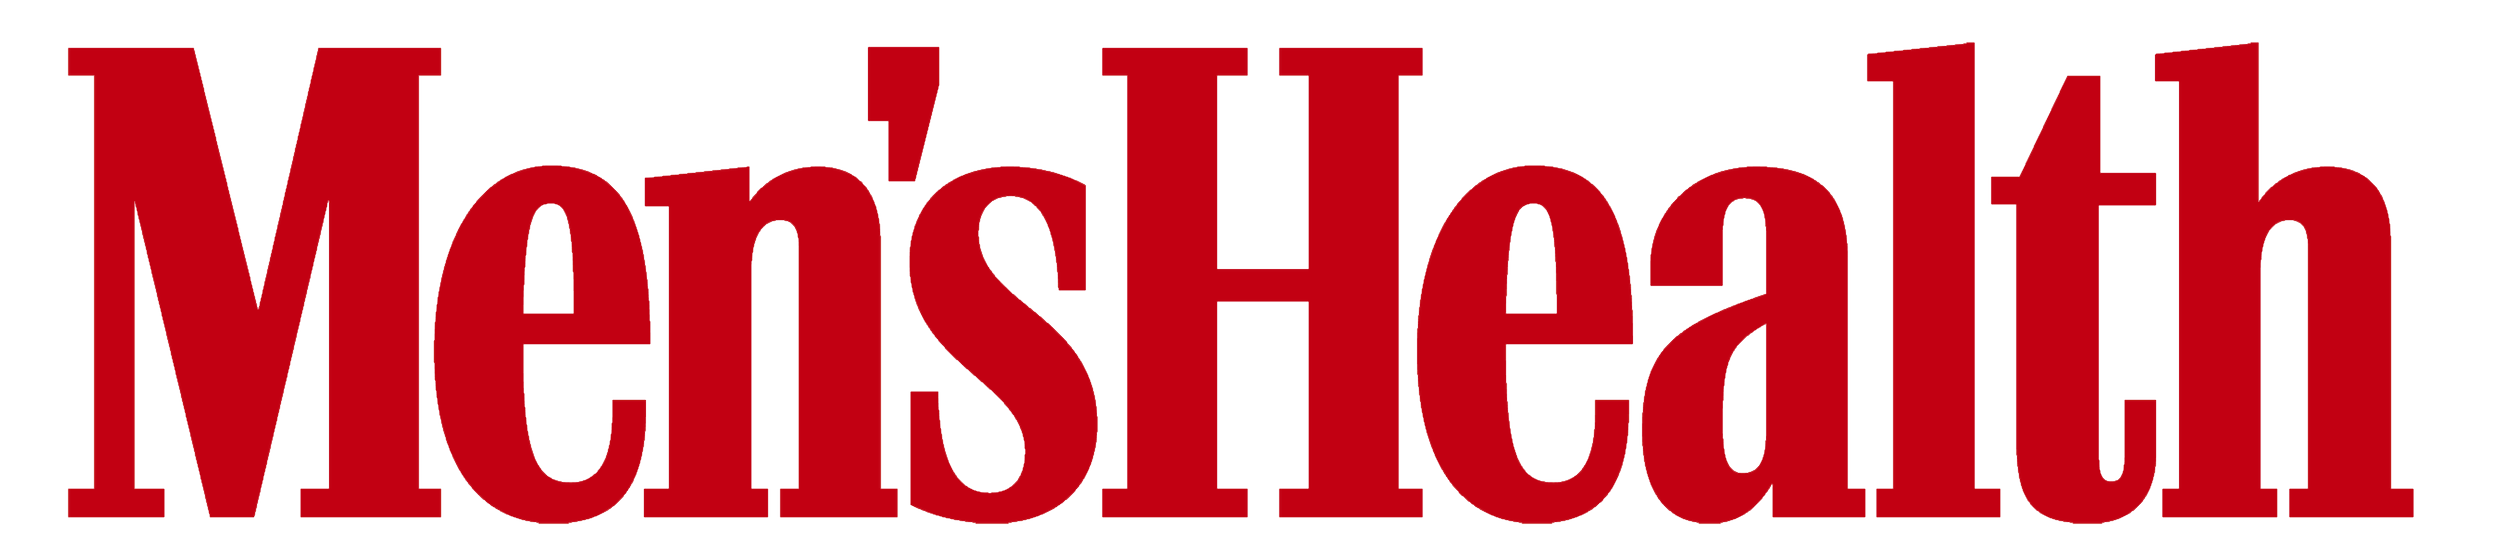 Mens_Health_logo_red.png